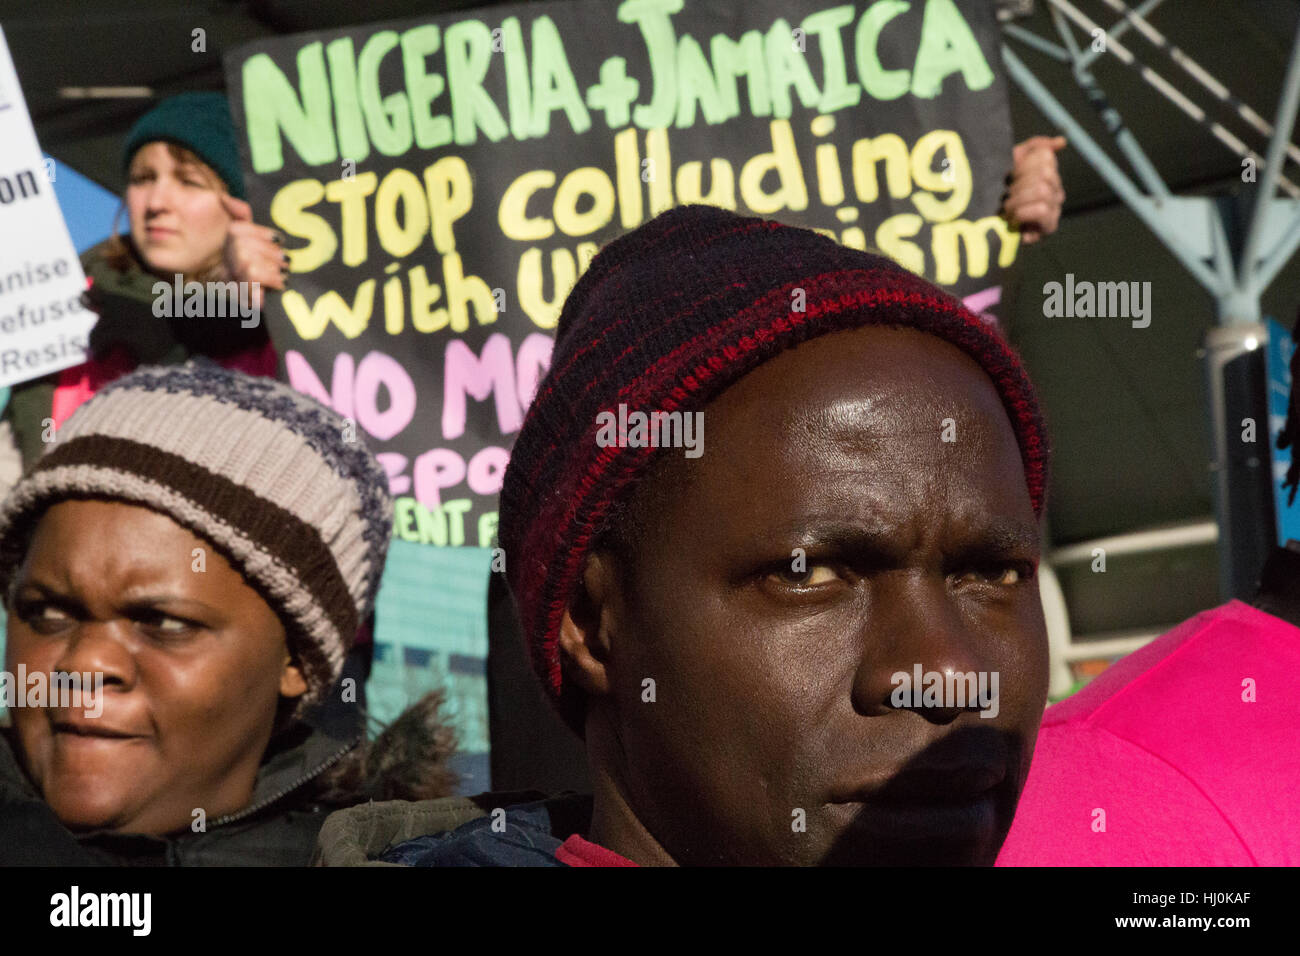 London UK 21st Jan 2017 protesters carring placards march thtough Peckham against the goverments mass Deportation Charter Flights to Nigeria, chana and Jamaica. Credit: Thabo Jaiyesimi/Alamy Live News Stock Photo